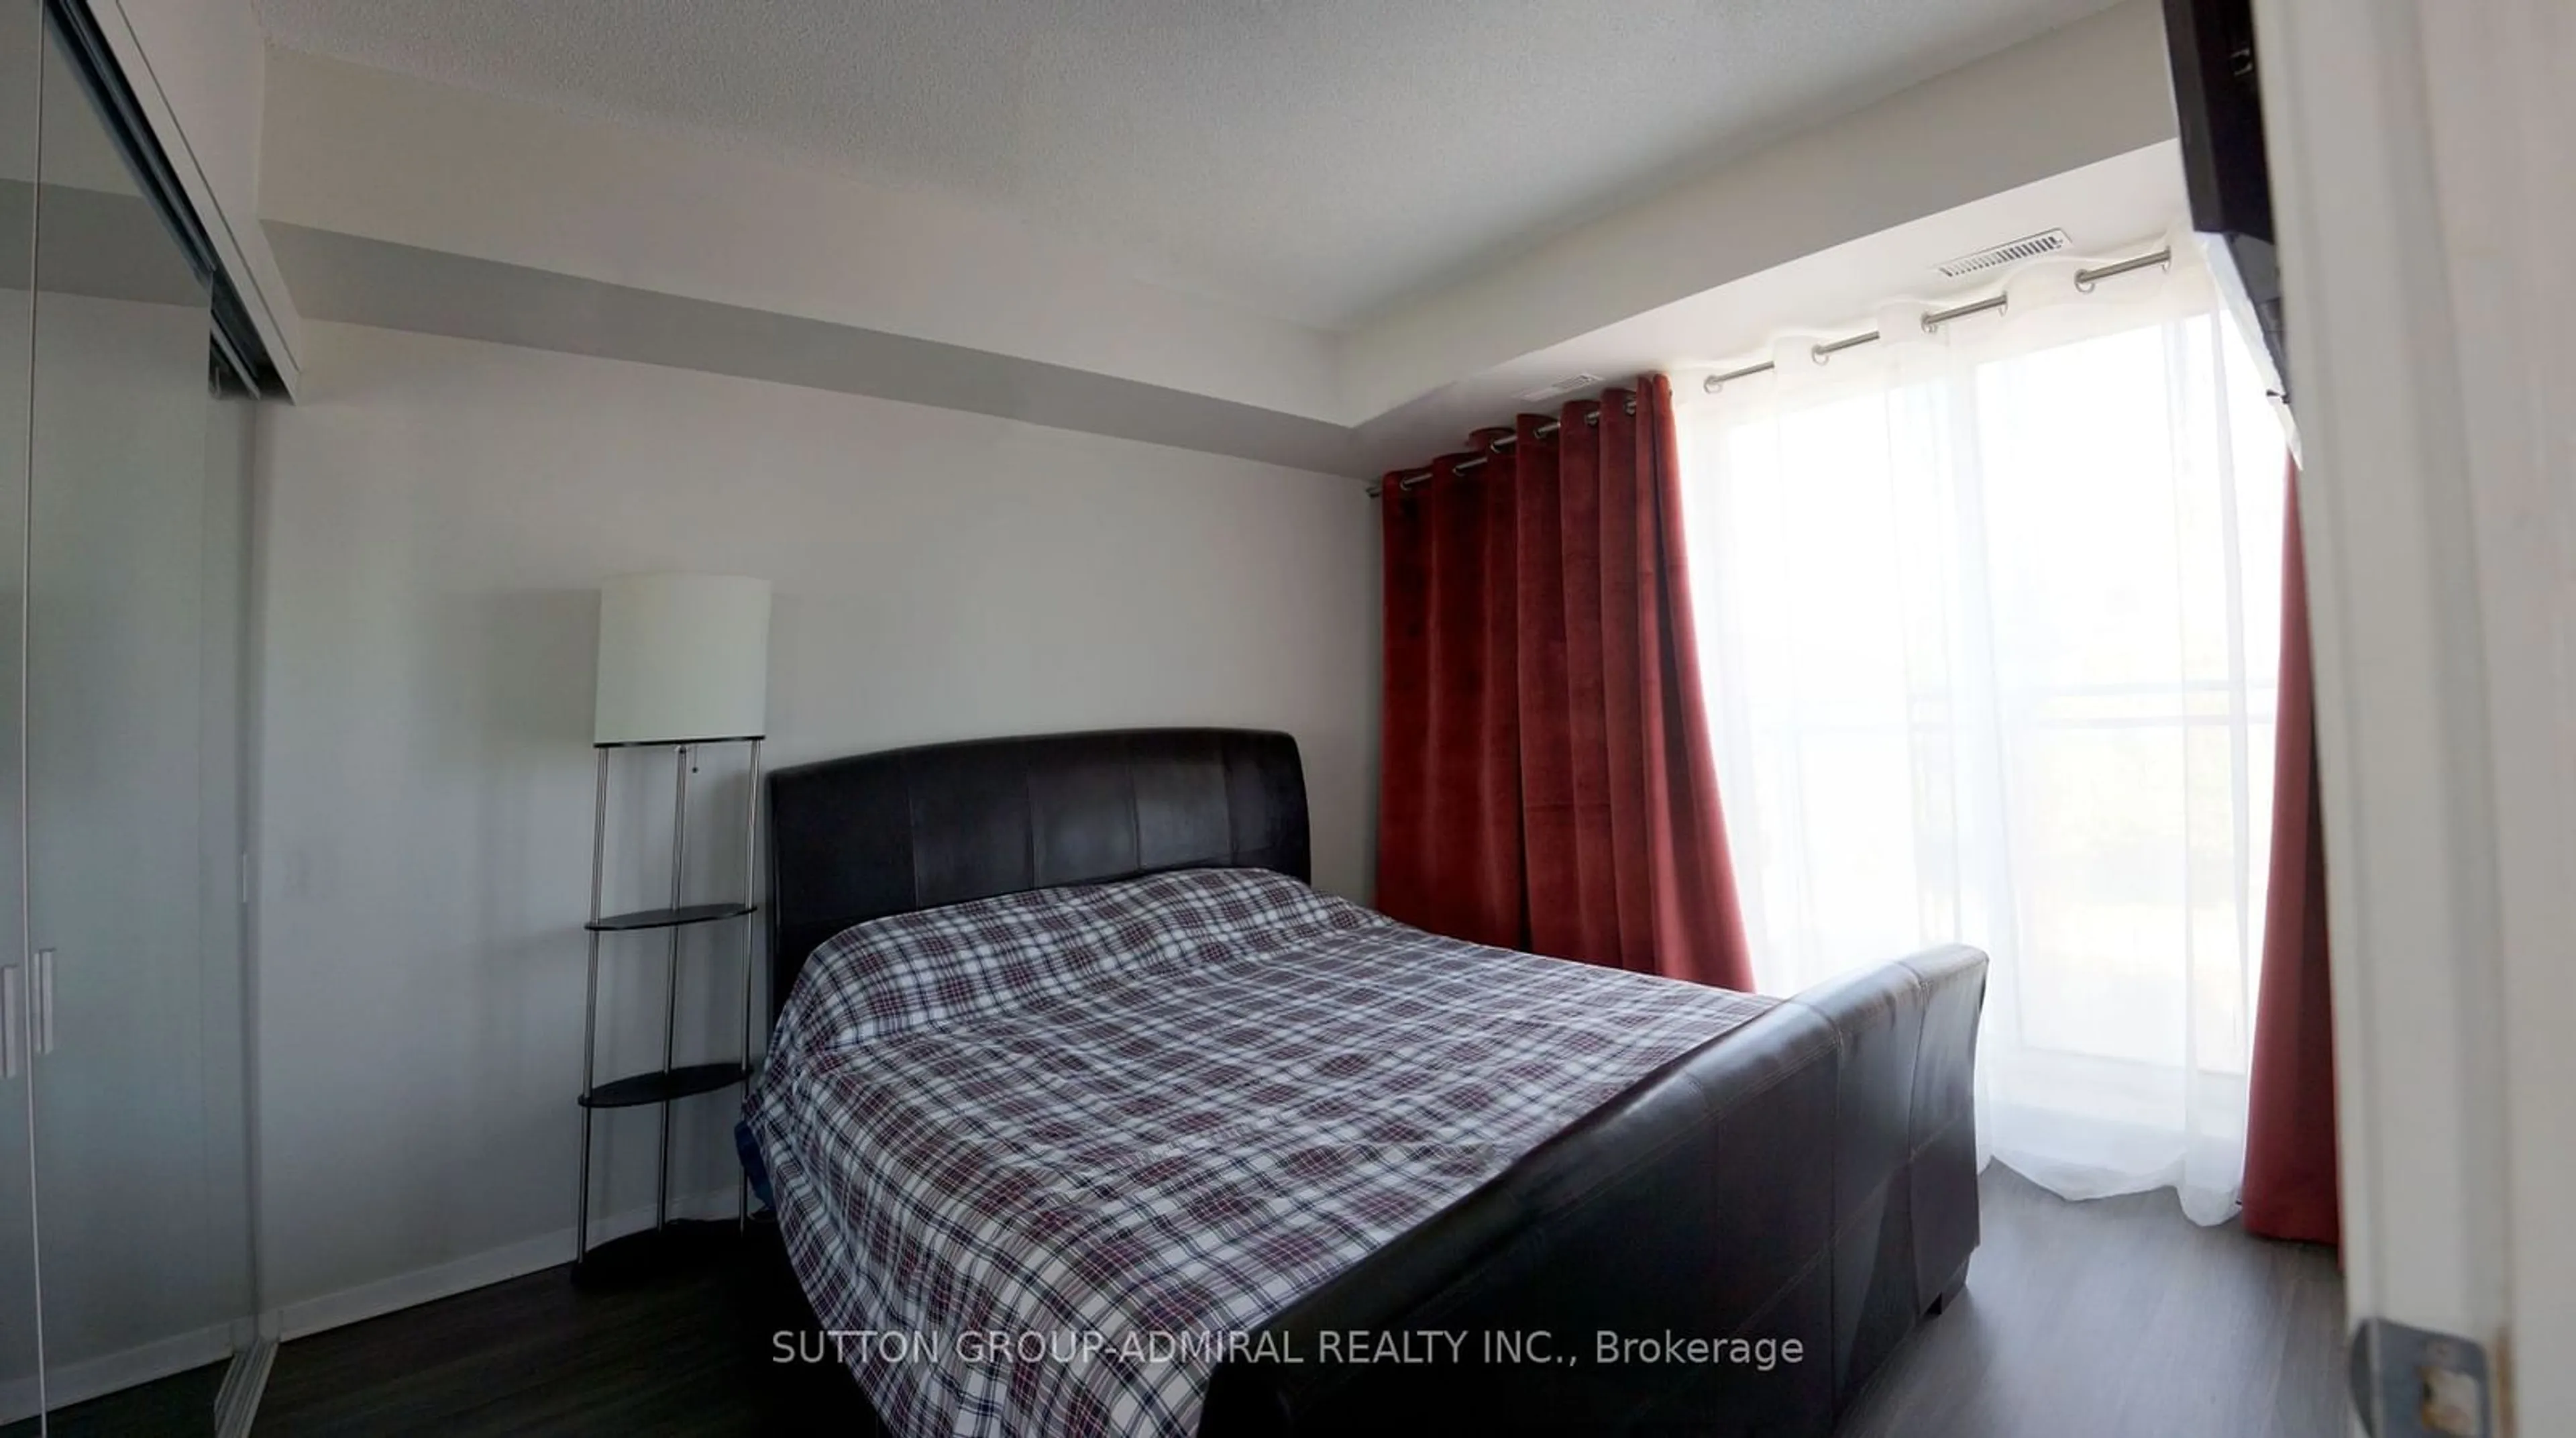 A pic of a room for 801 Sheppard Ave #302, Toronto Ontario M3H 2T3